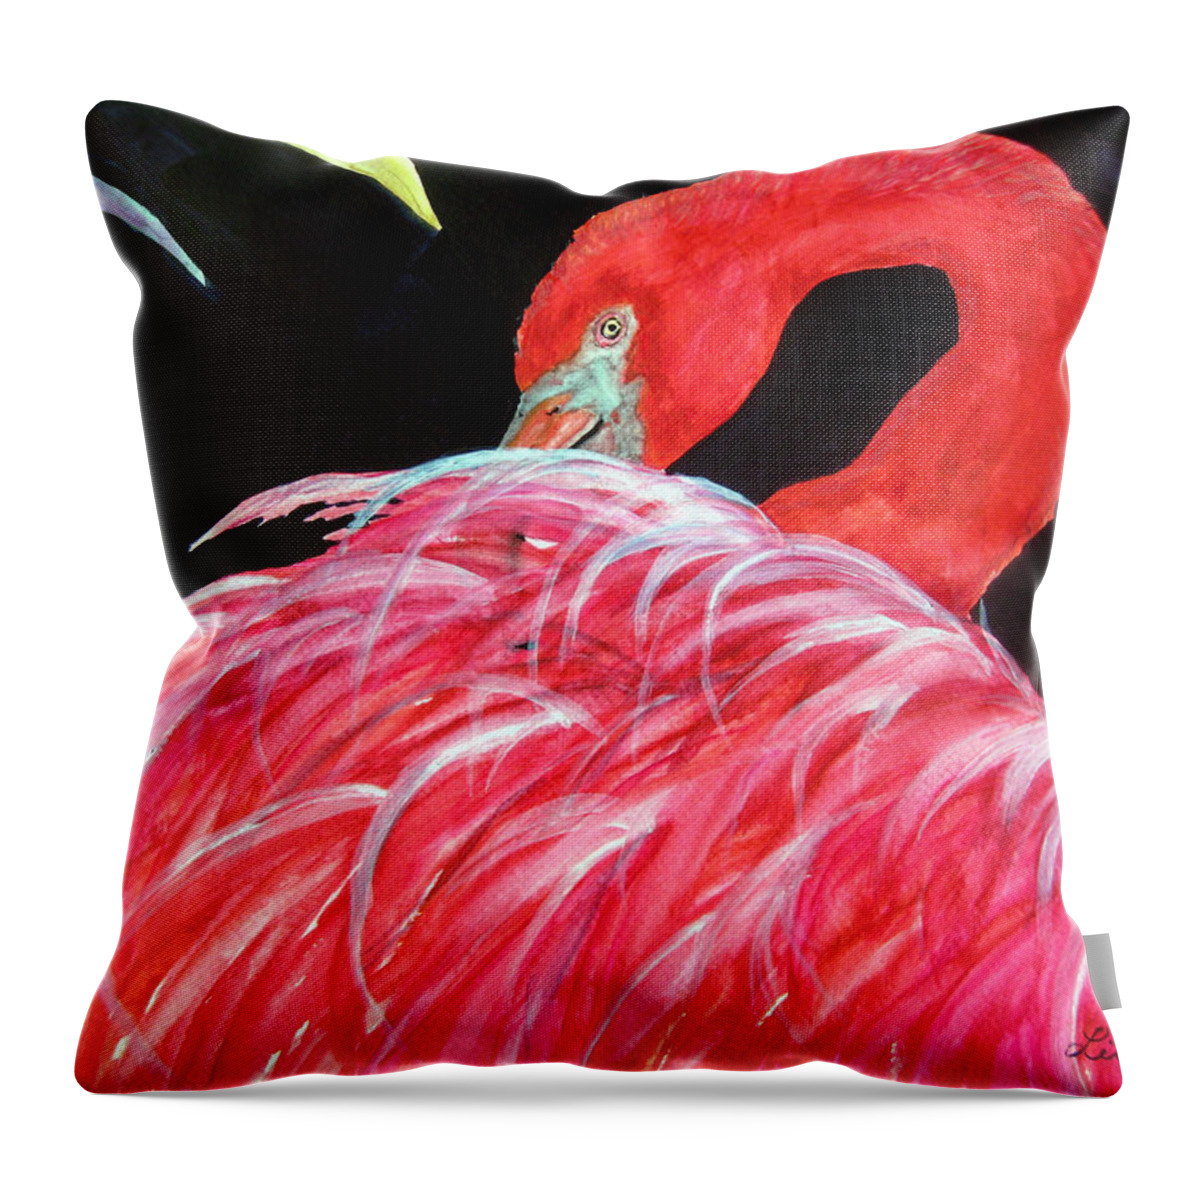 Pink Throw Pillow featuring the painting Night Flamingo by Lil Taylor